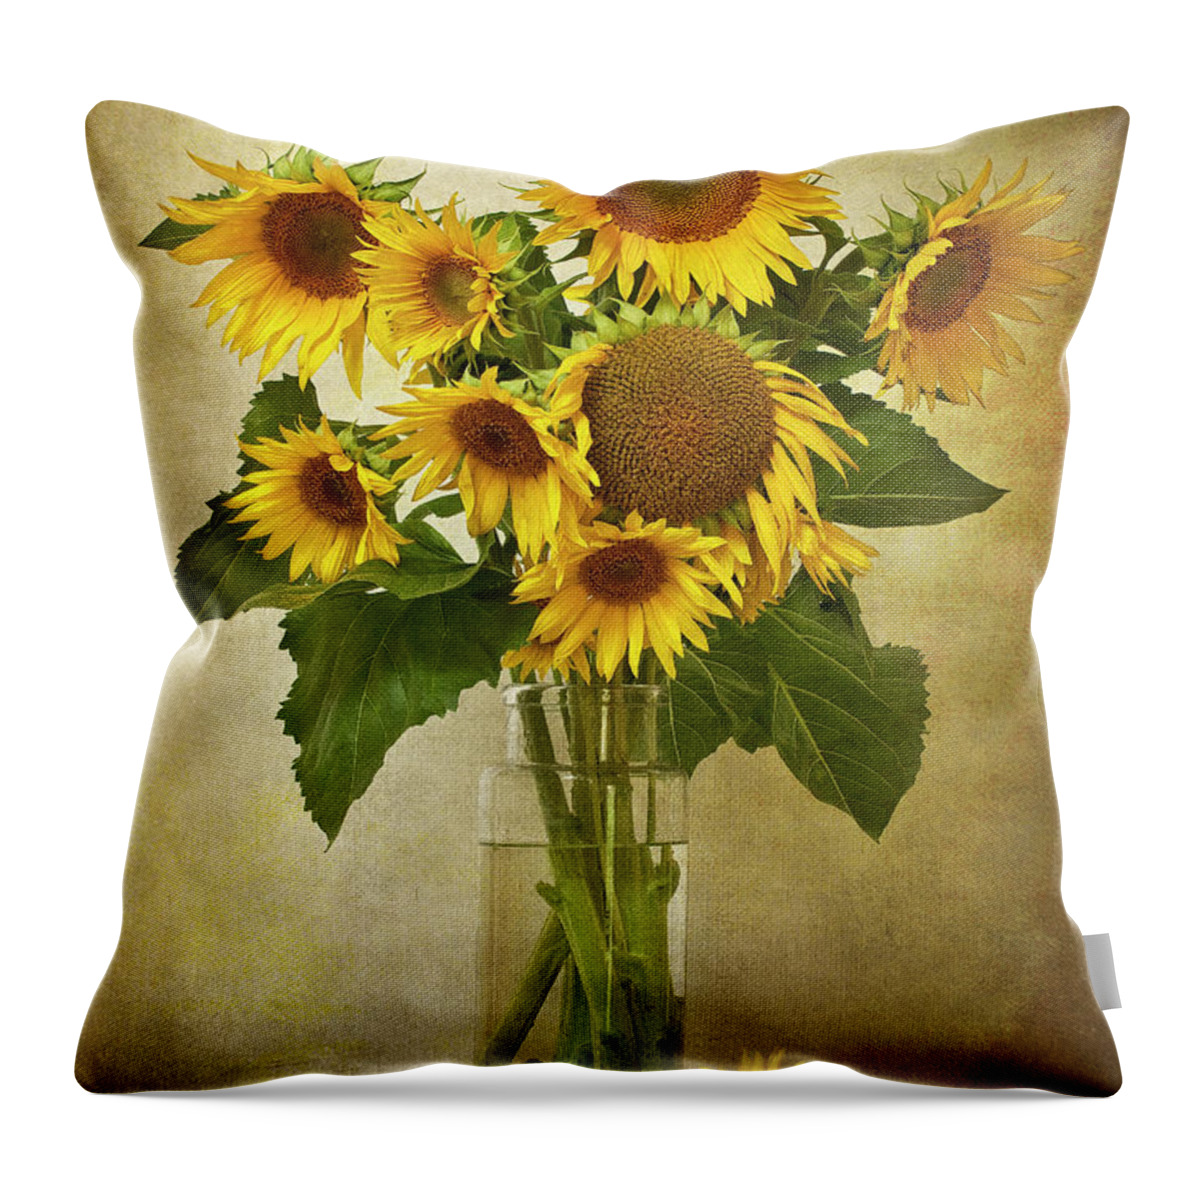 Loire Valley Throw Pillow featuring the photograph Sunflowers In Vase by © Leslie Nicole Photographic Art